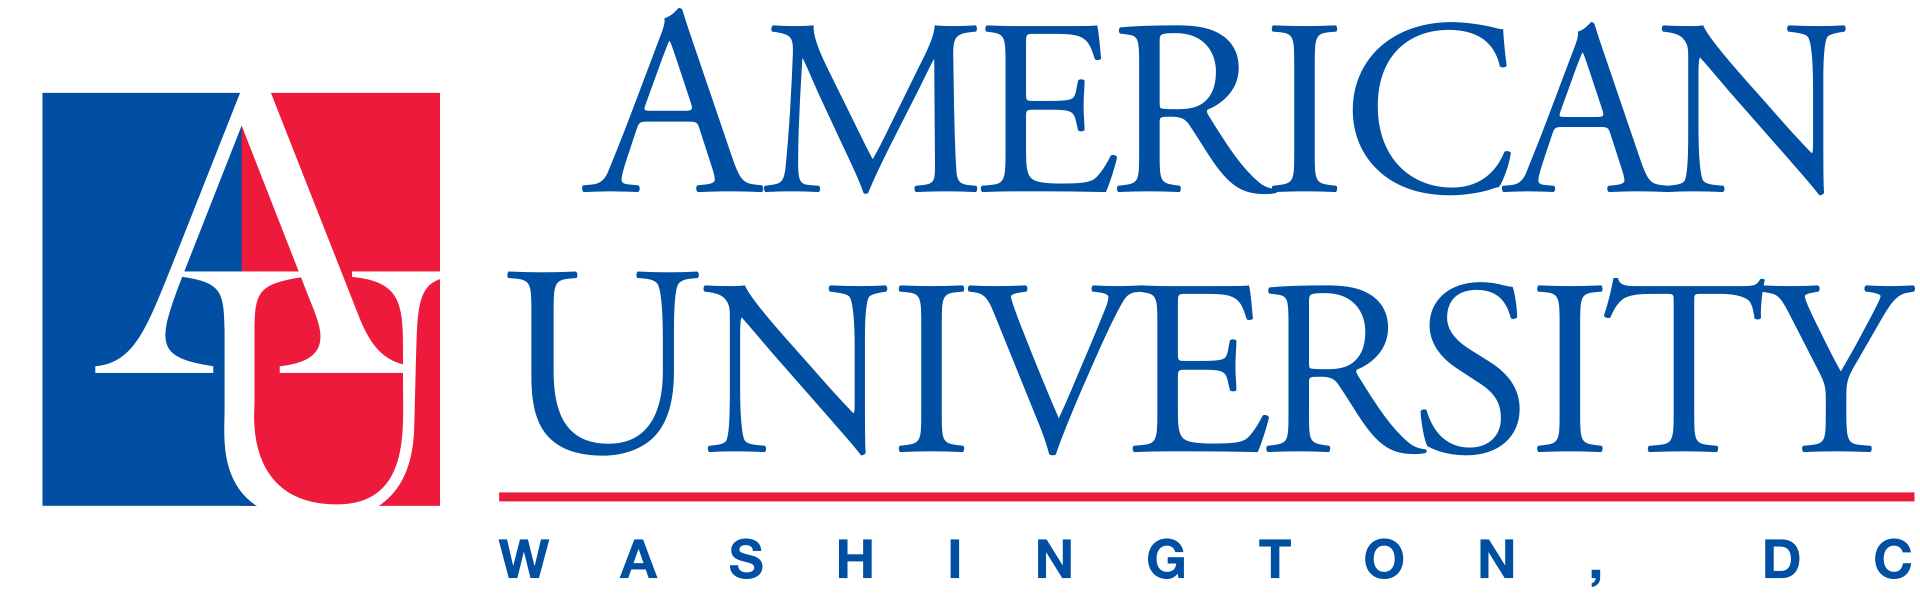 American University logo, By American University - http://www.american.edu, Public Domain, http://commons.wikimedia.org/w/index.php?curid=54500563"